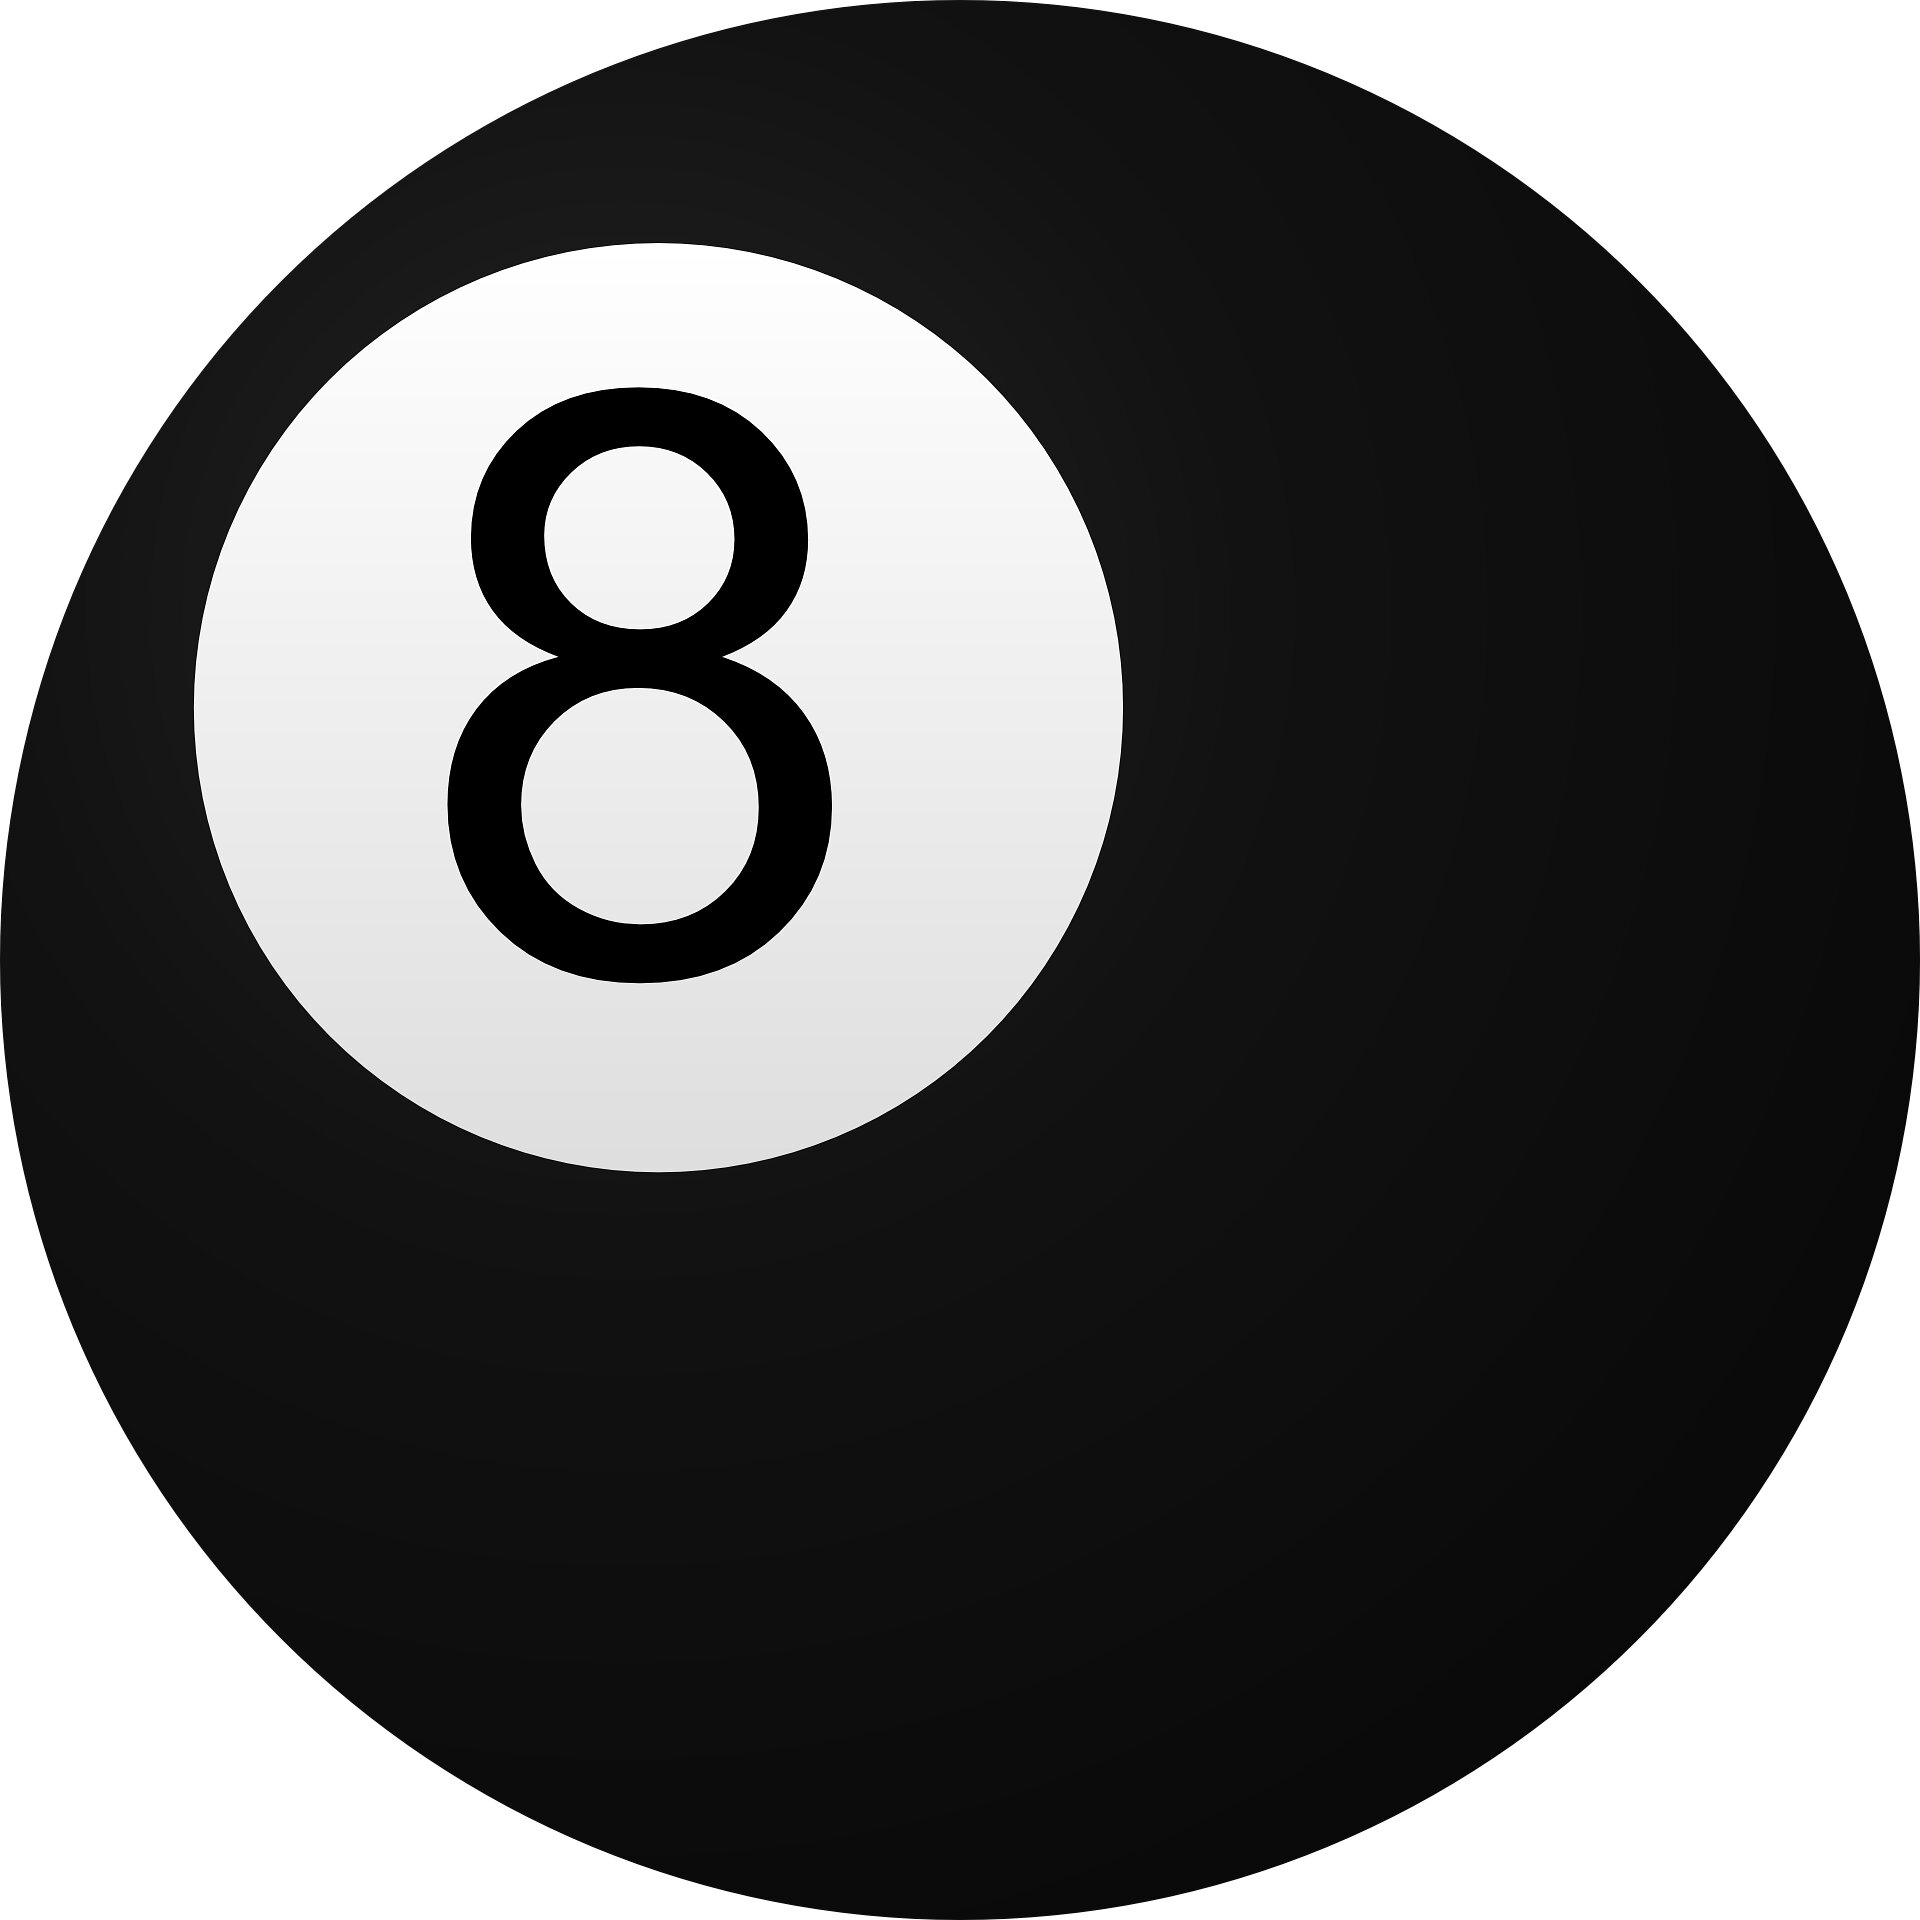 Q&A: Are large language models the modern-day Magic 8 Ball?